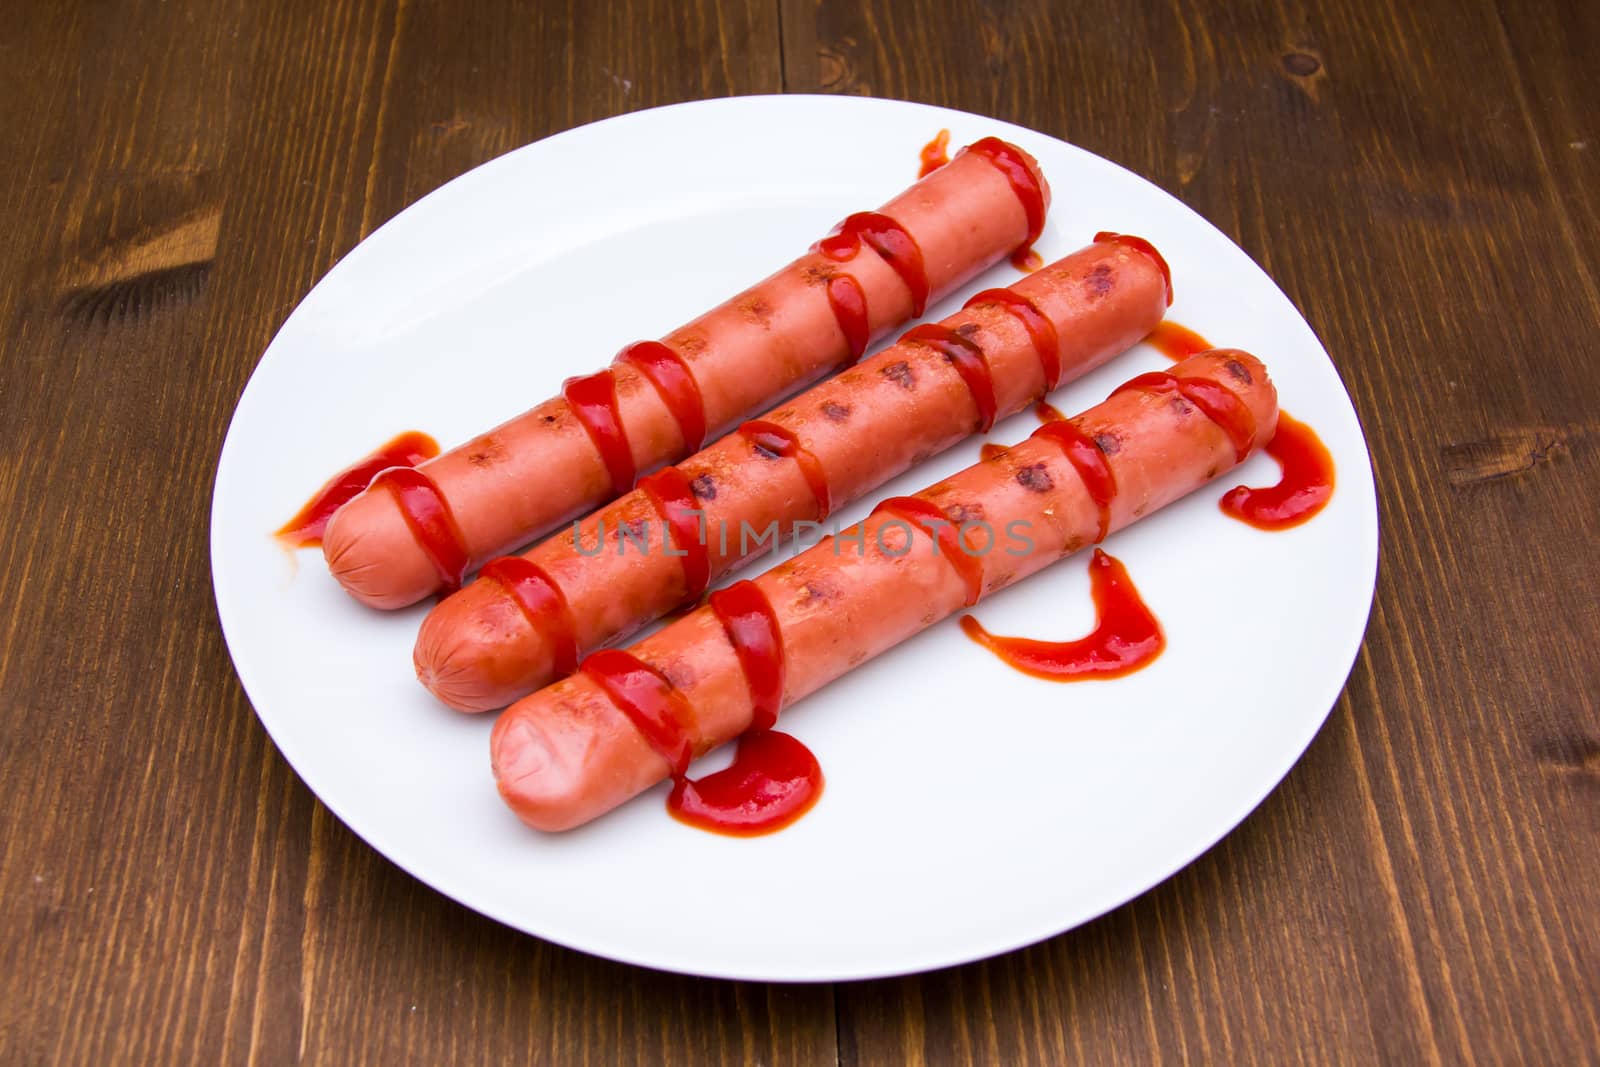 Sausages with tomato sauce on wood by spafra